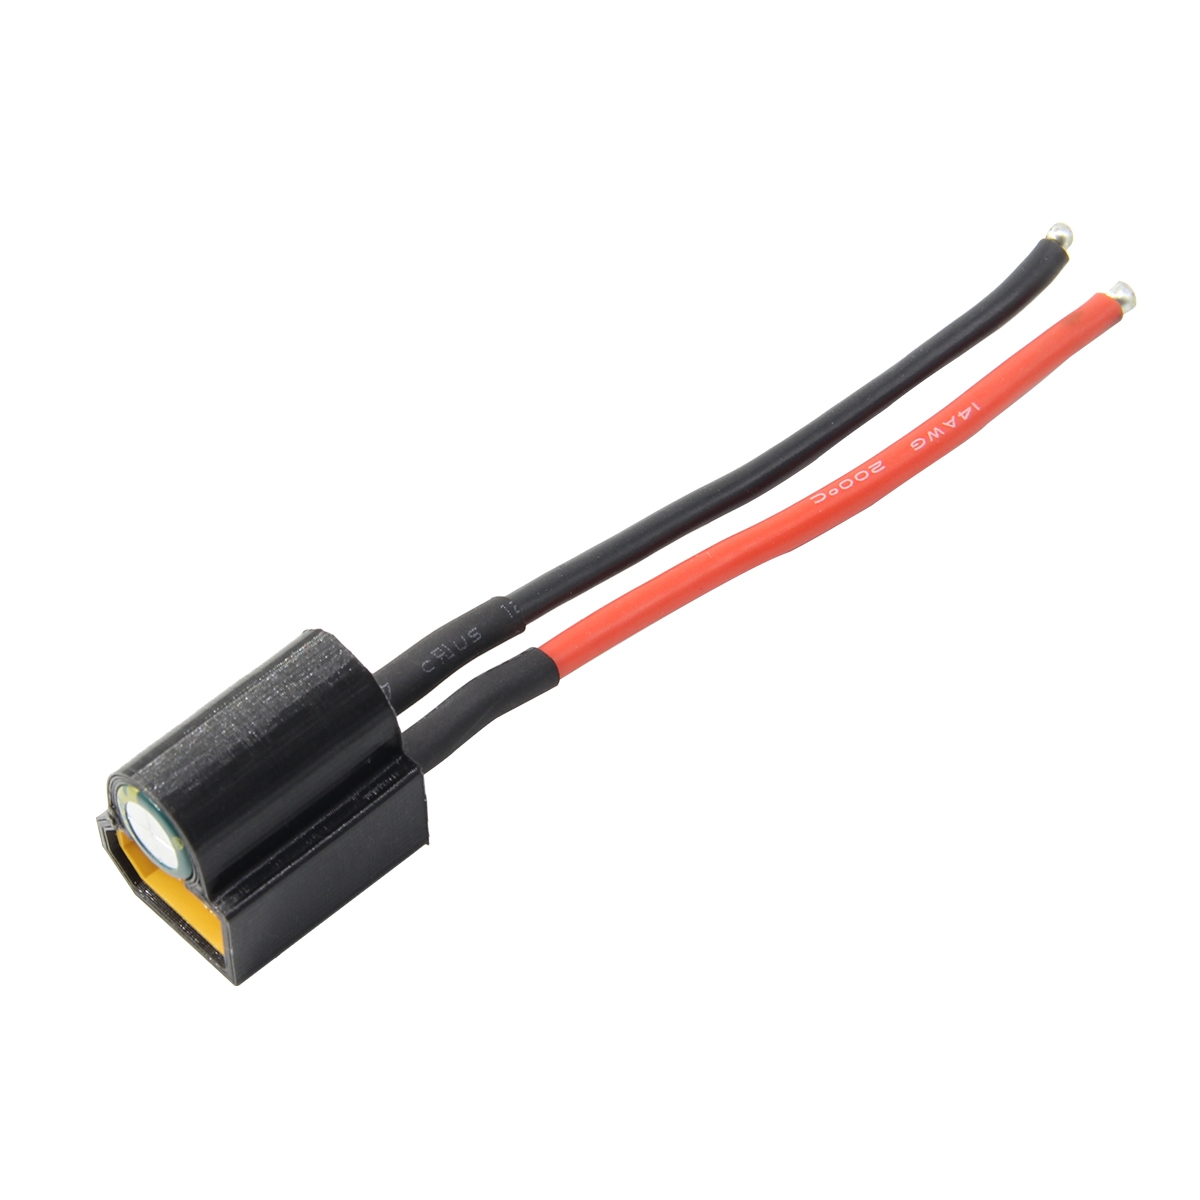 HGLRC 35V 1000uF Filter Capacitor XT60 14AWG 100mm Cable Wire for RC Drone FPV Racing